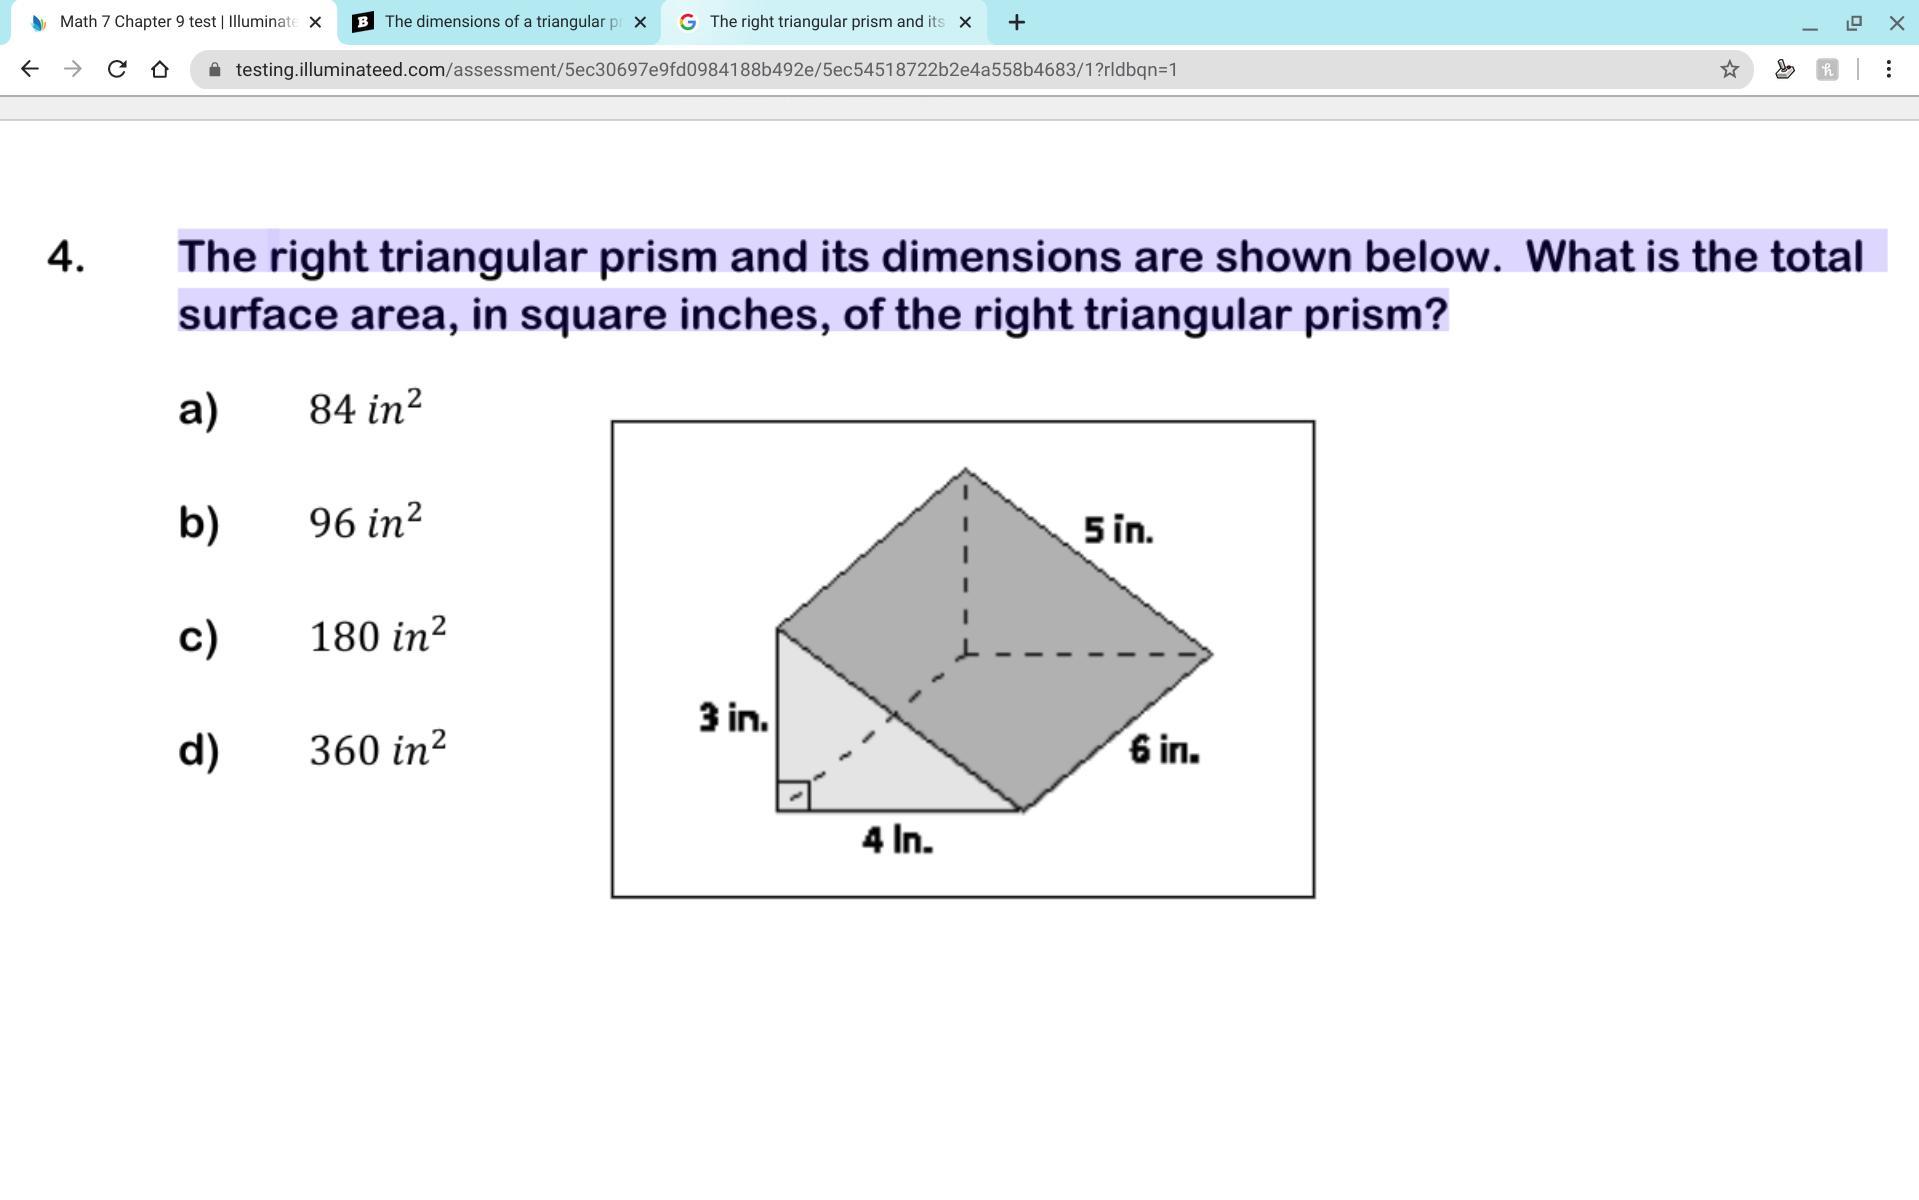 The right triangular prism and its dimensions are shown below